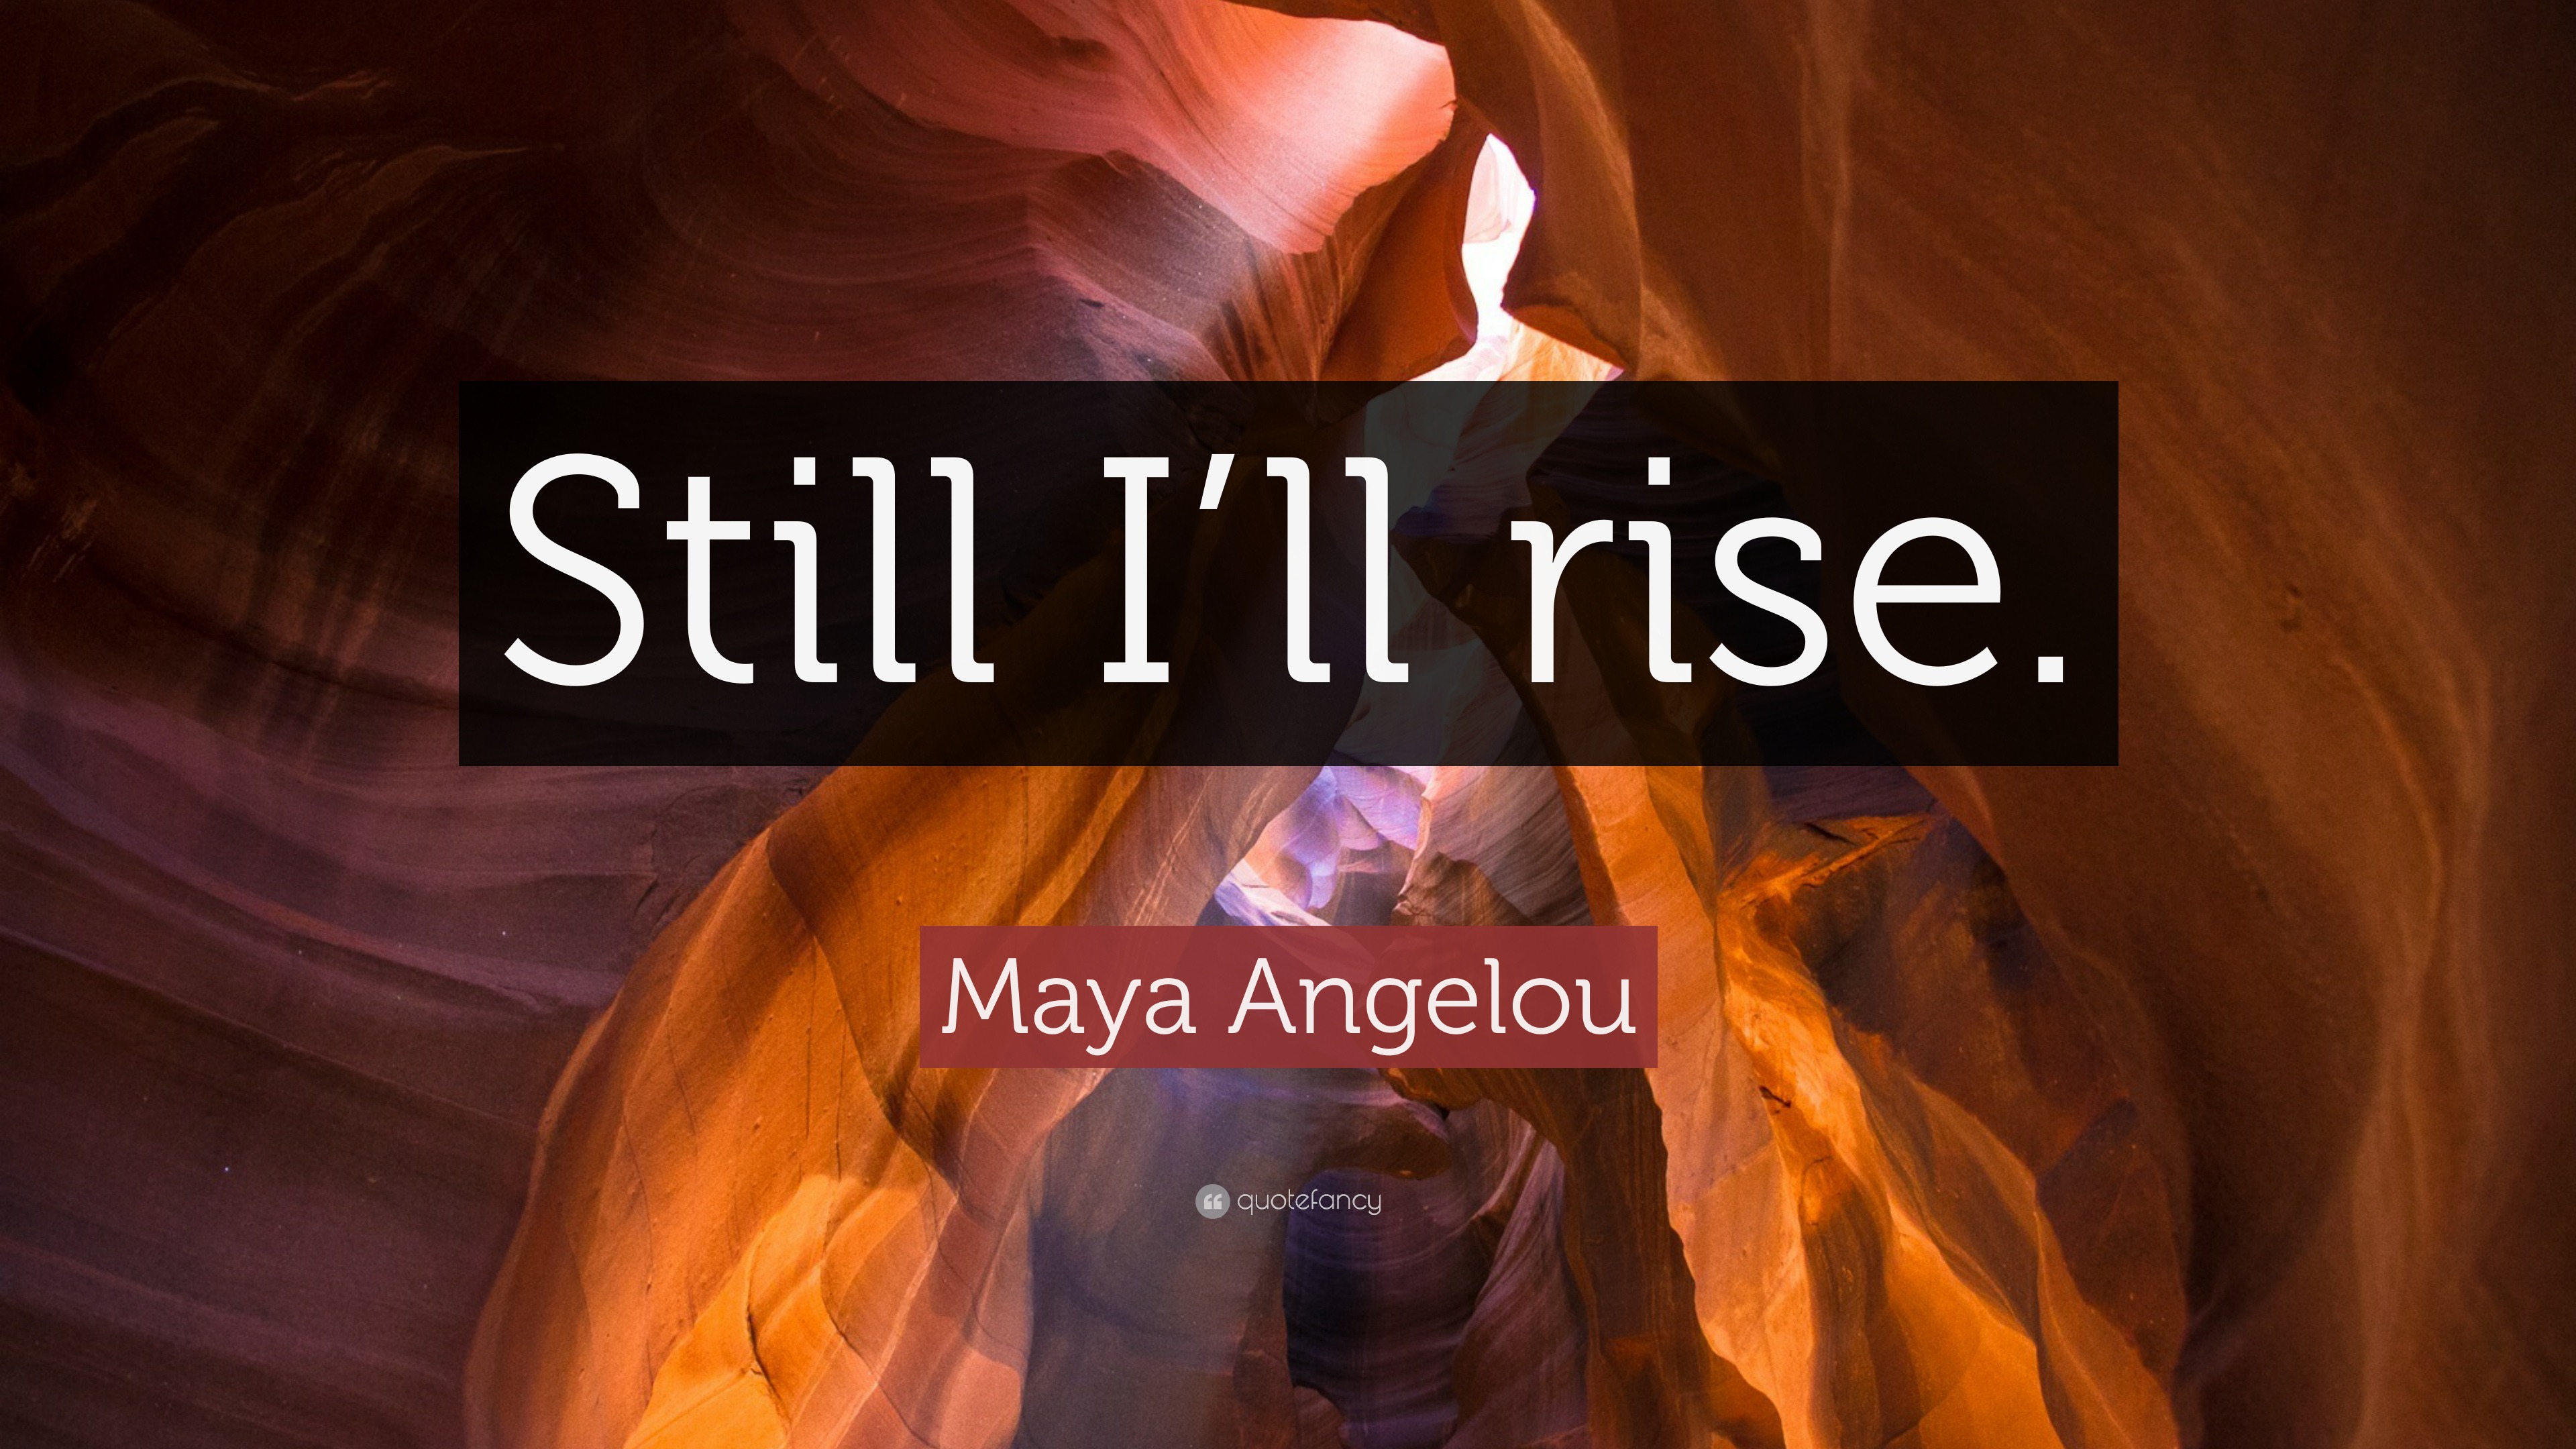 maya angelou rise quote